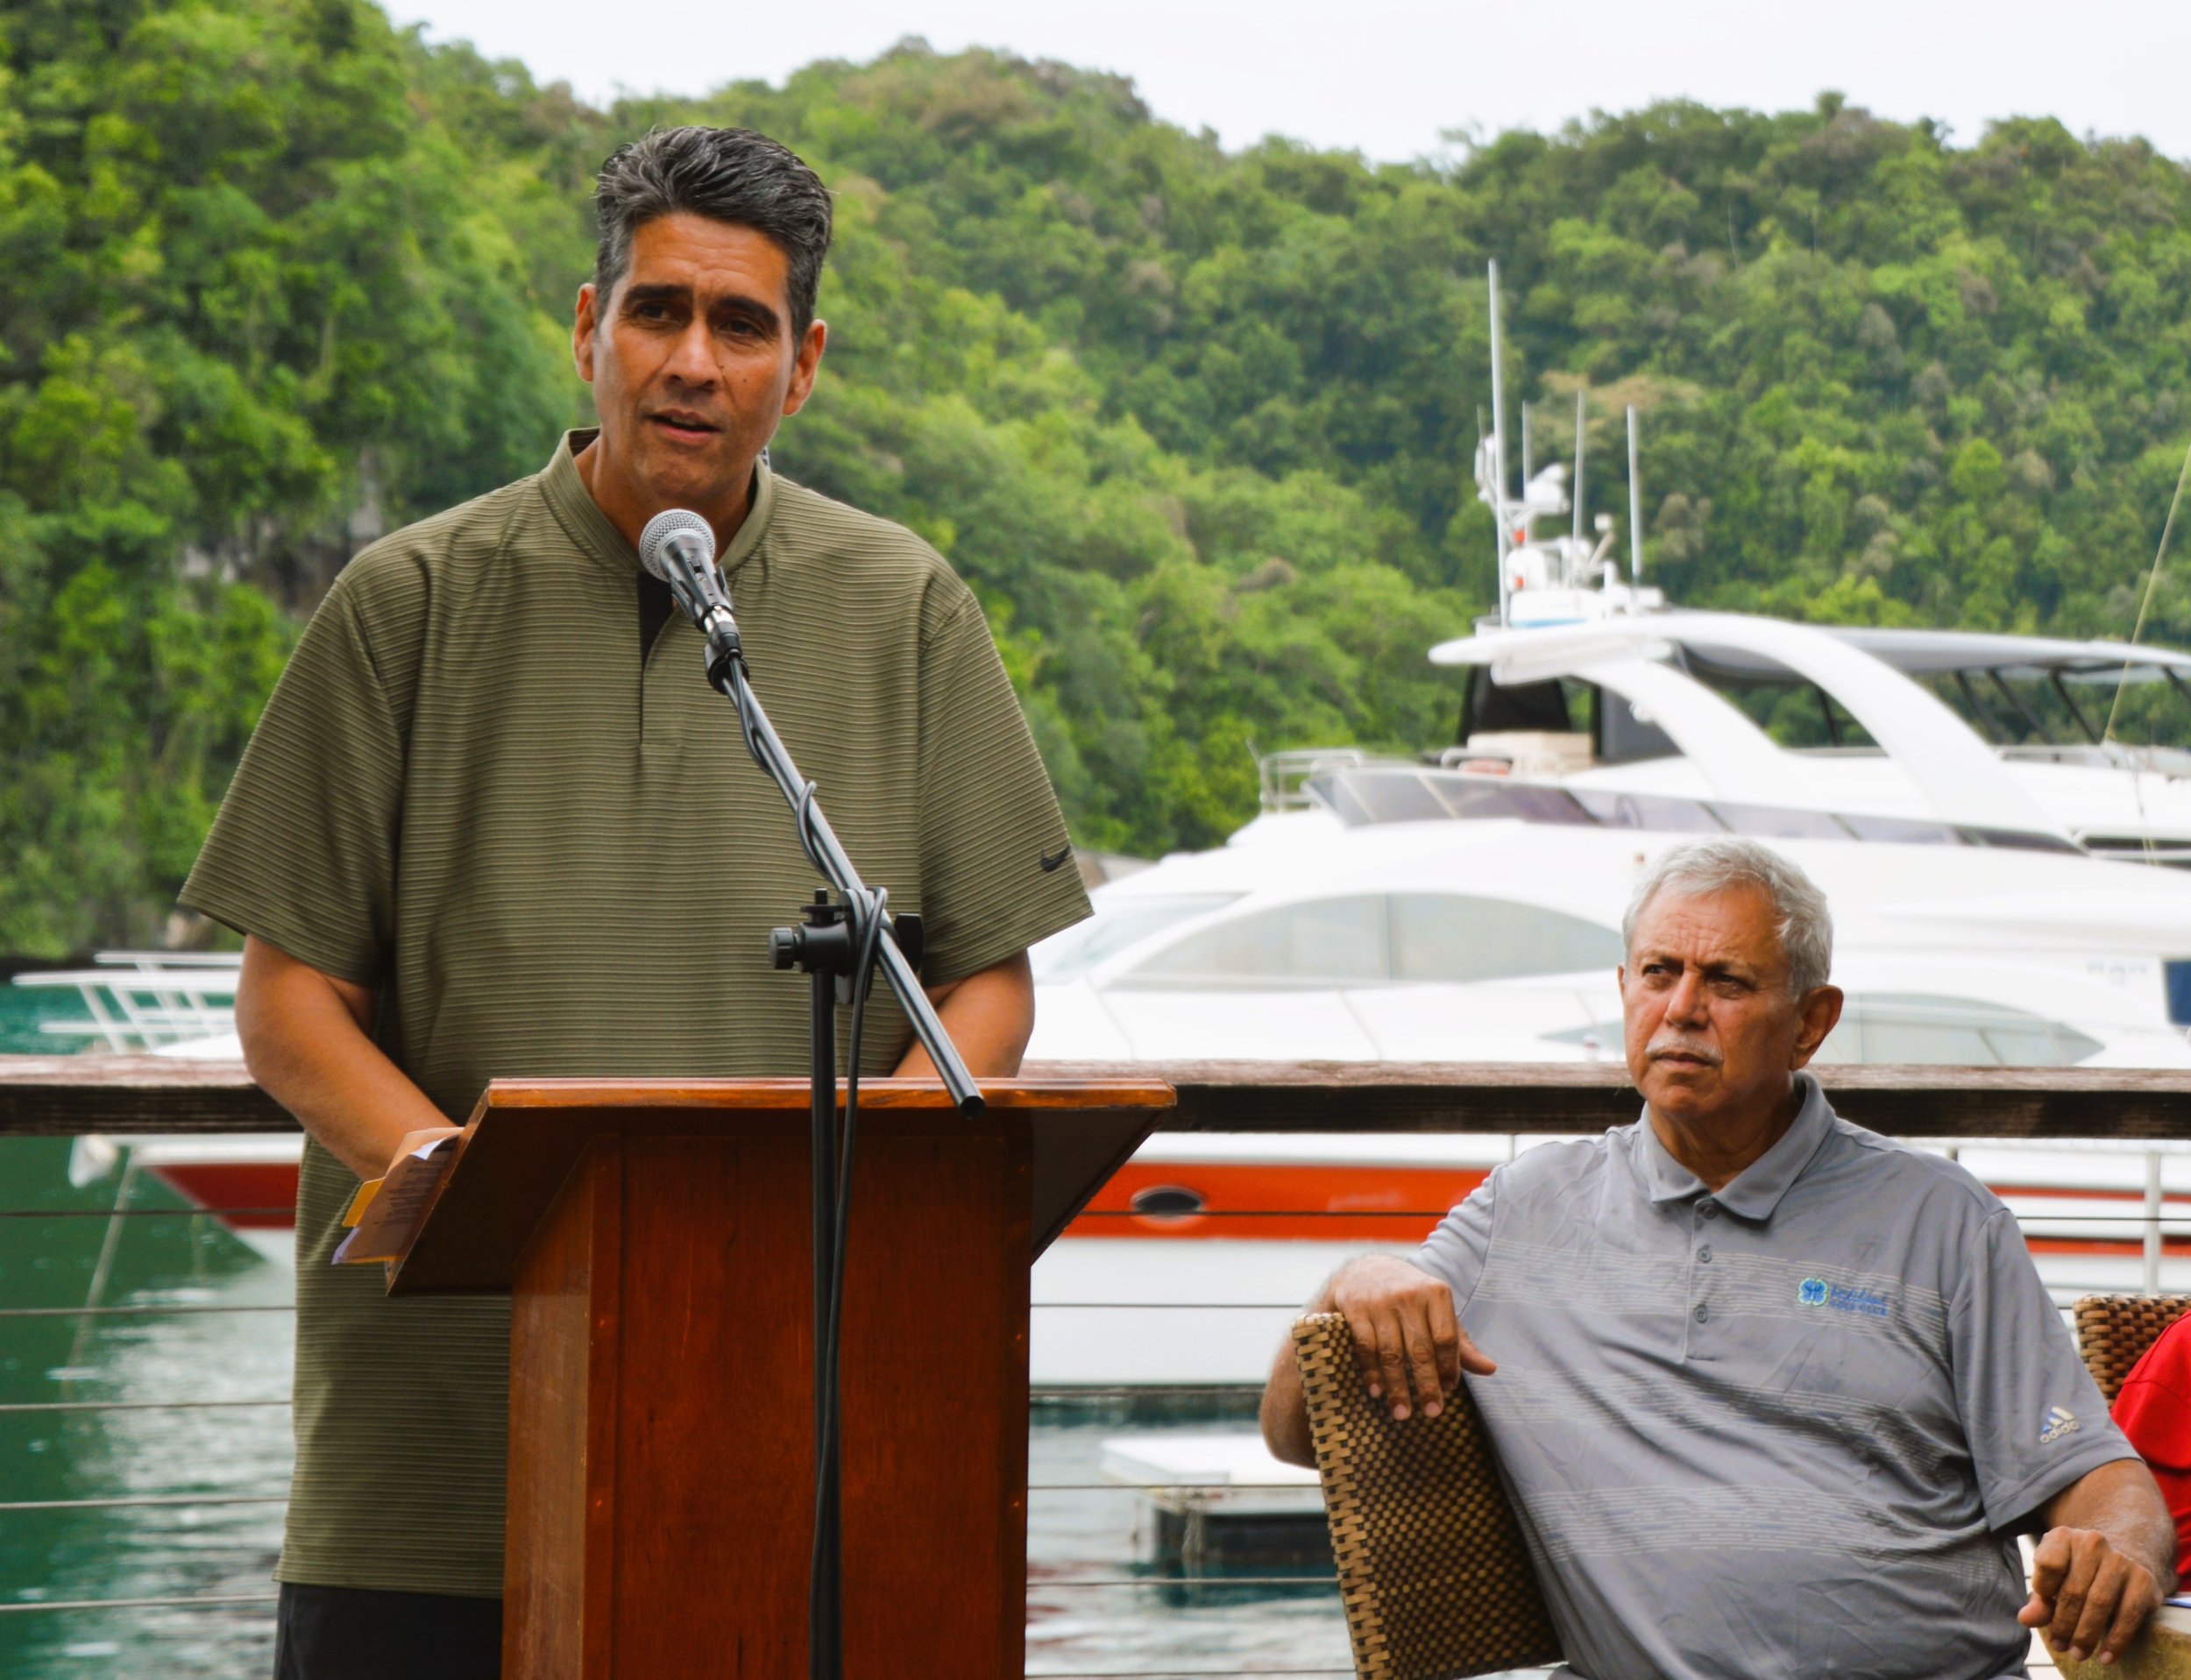 Surangel Whipps Jr., President of the Republic of Palau (left), and Alan Seid, Honorary Consul of the State of Israel in the Republic of Palau (right). Photo — Shai Afsai